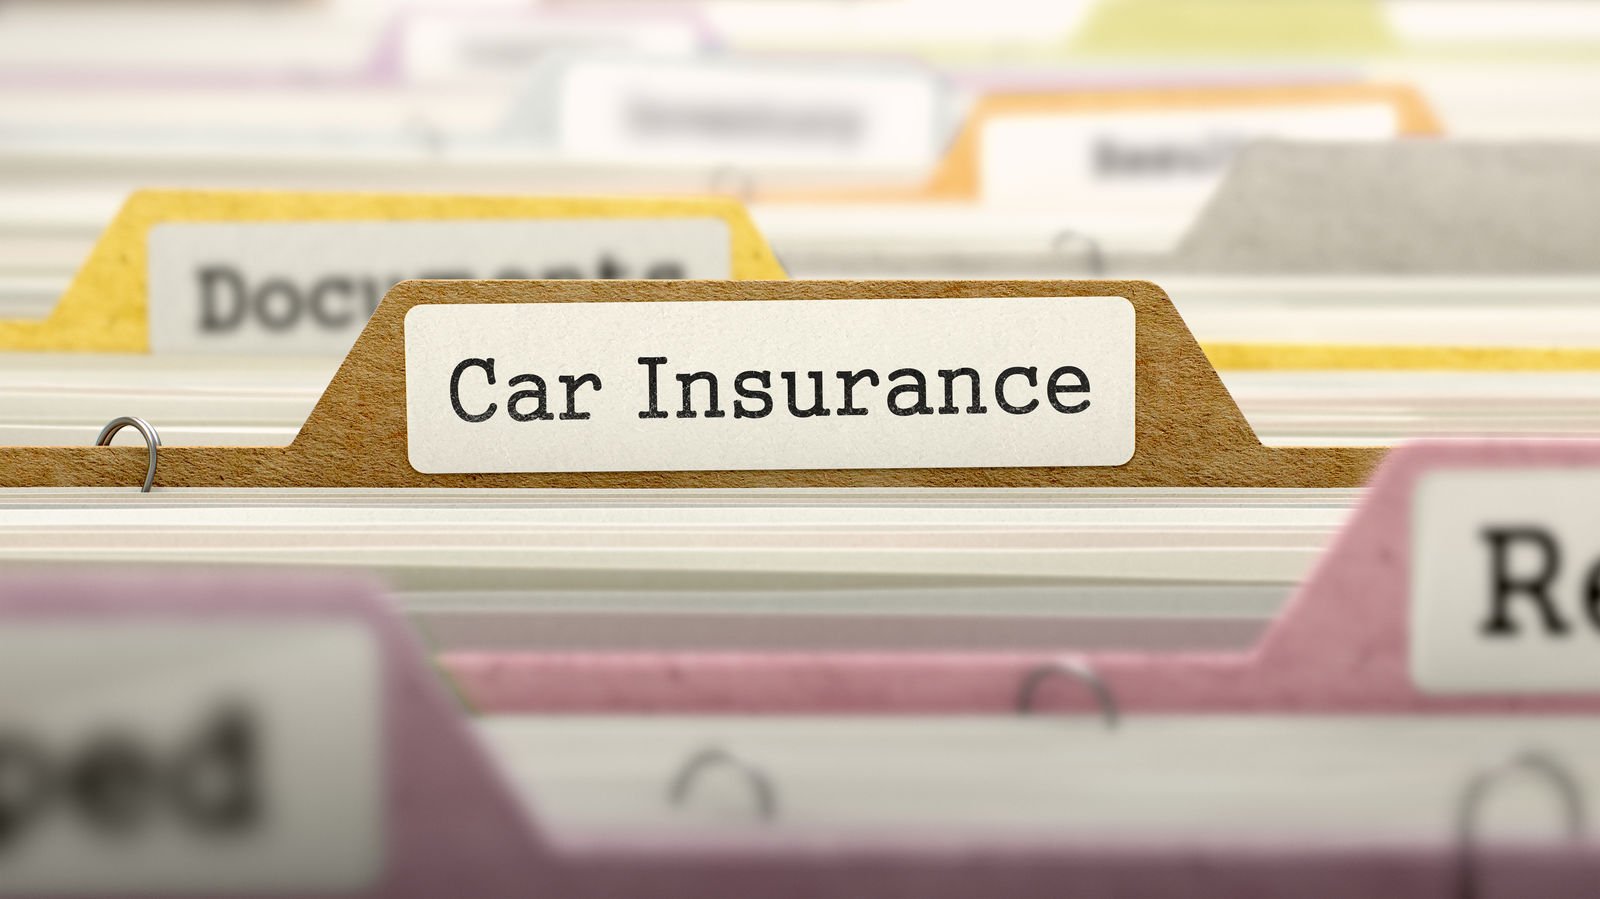 What documents do you need to get auto insurance?